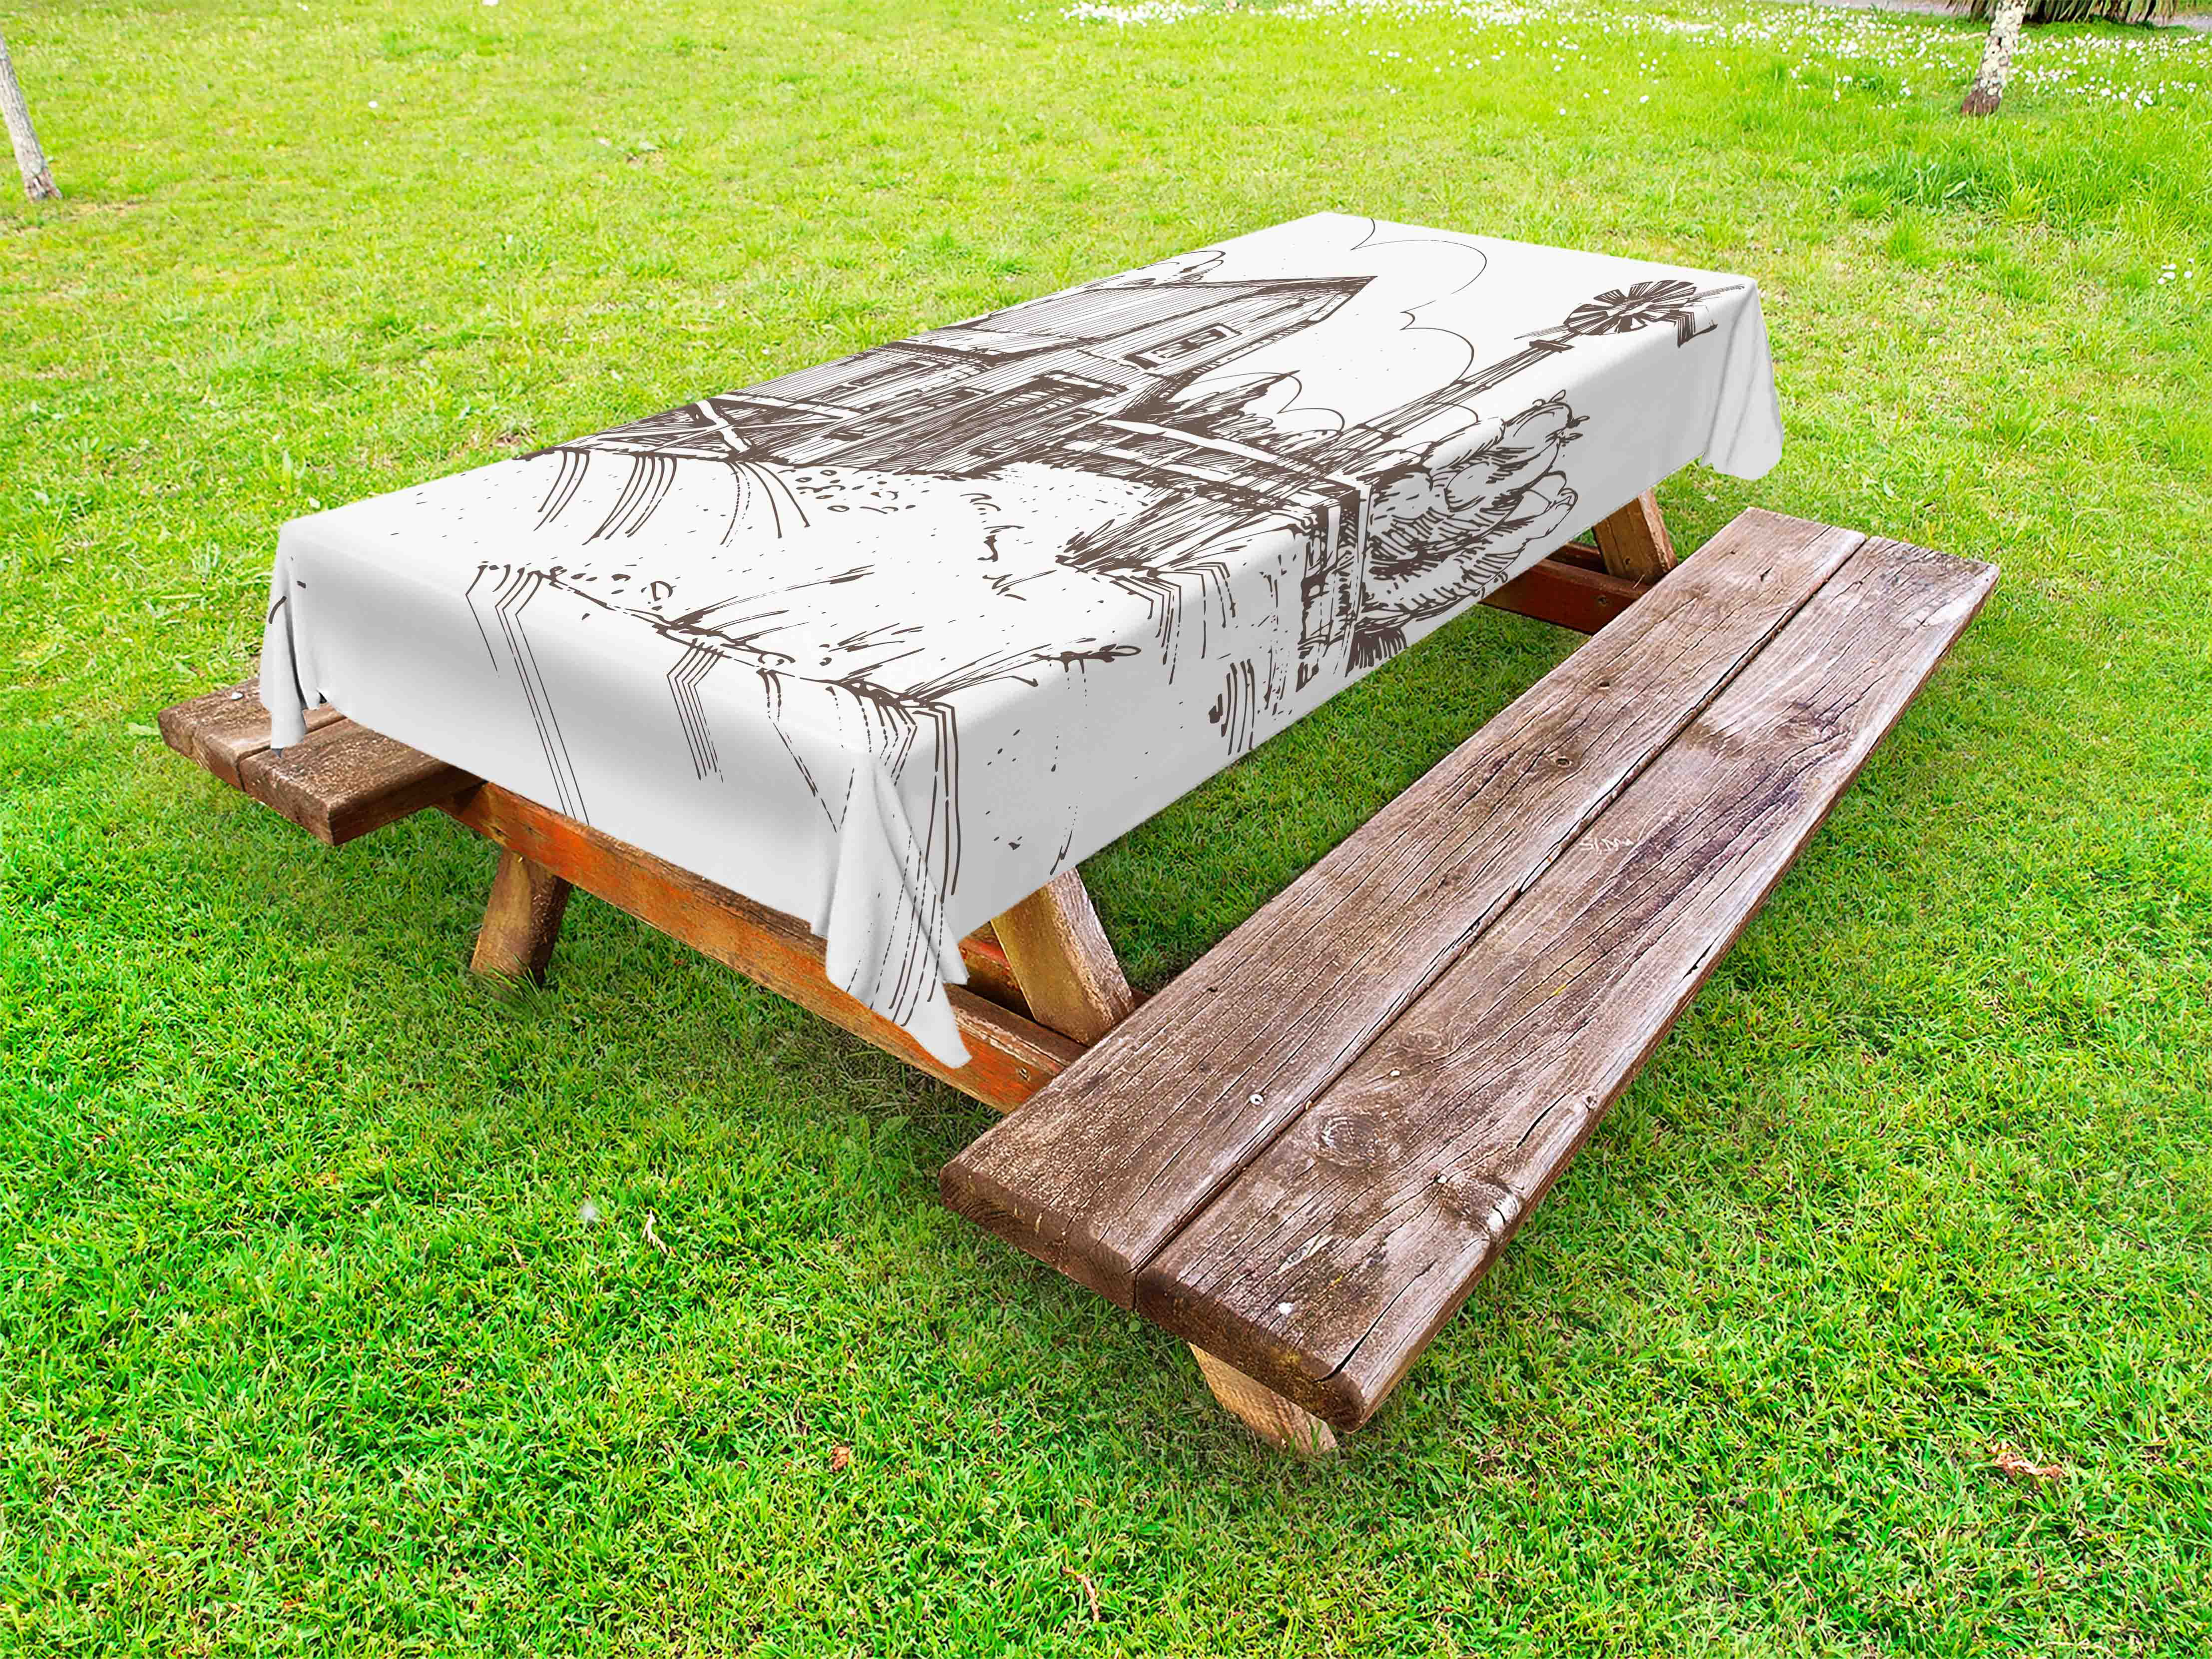 Wooden Outdoor Picnic Tablecloth Brown Farmhouse Style Print 58 X 84 Inches